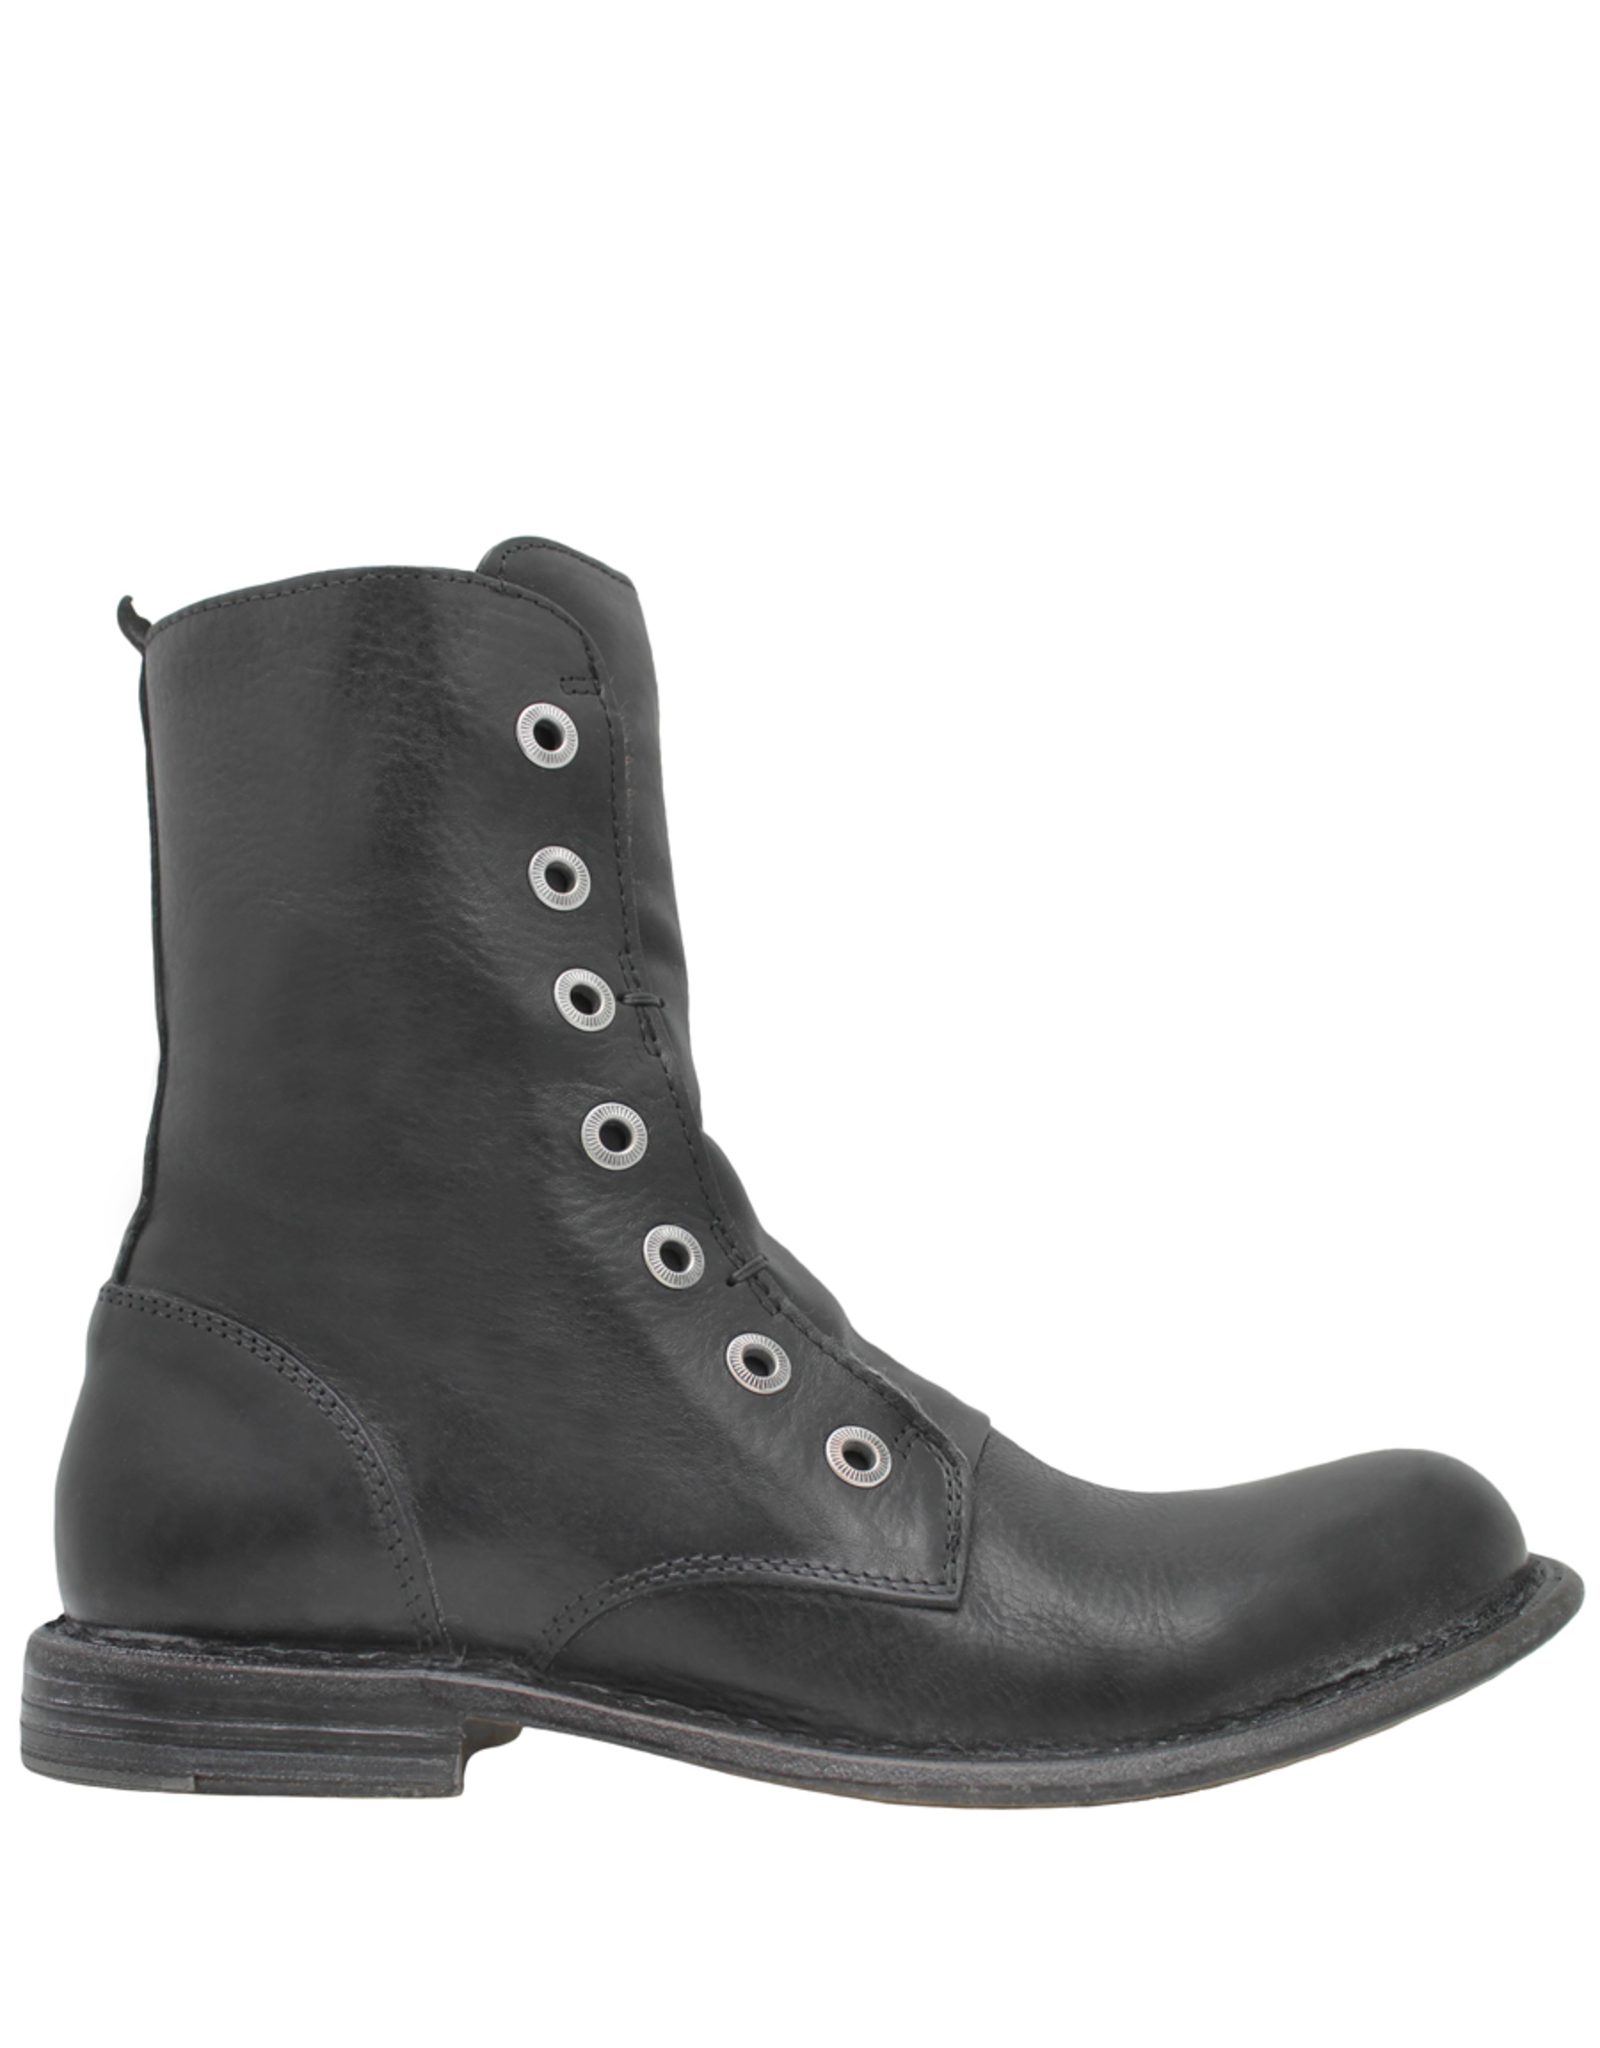 Moma Black No Lace Boot 3333 - Head Shoes